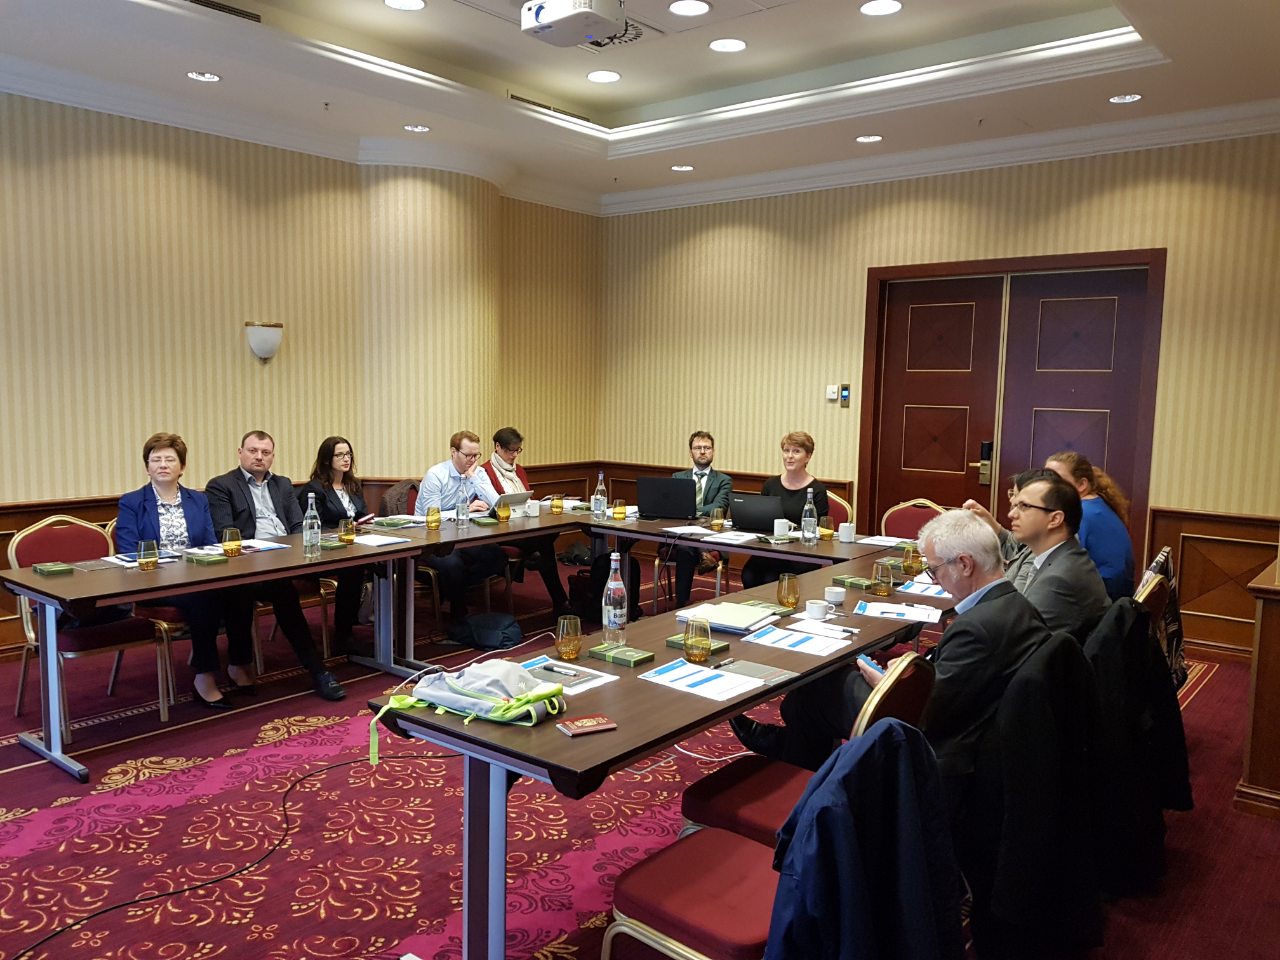 EEN TG Clusters Annual Meeting 2019, Bucharest, Romania